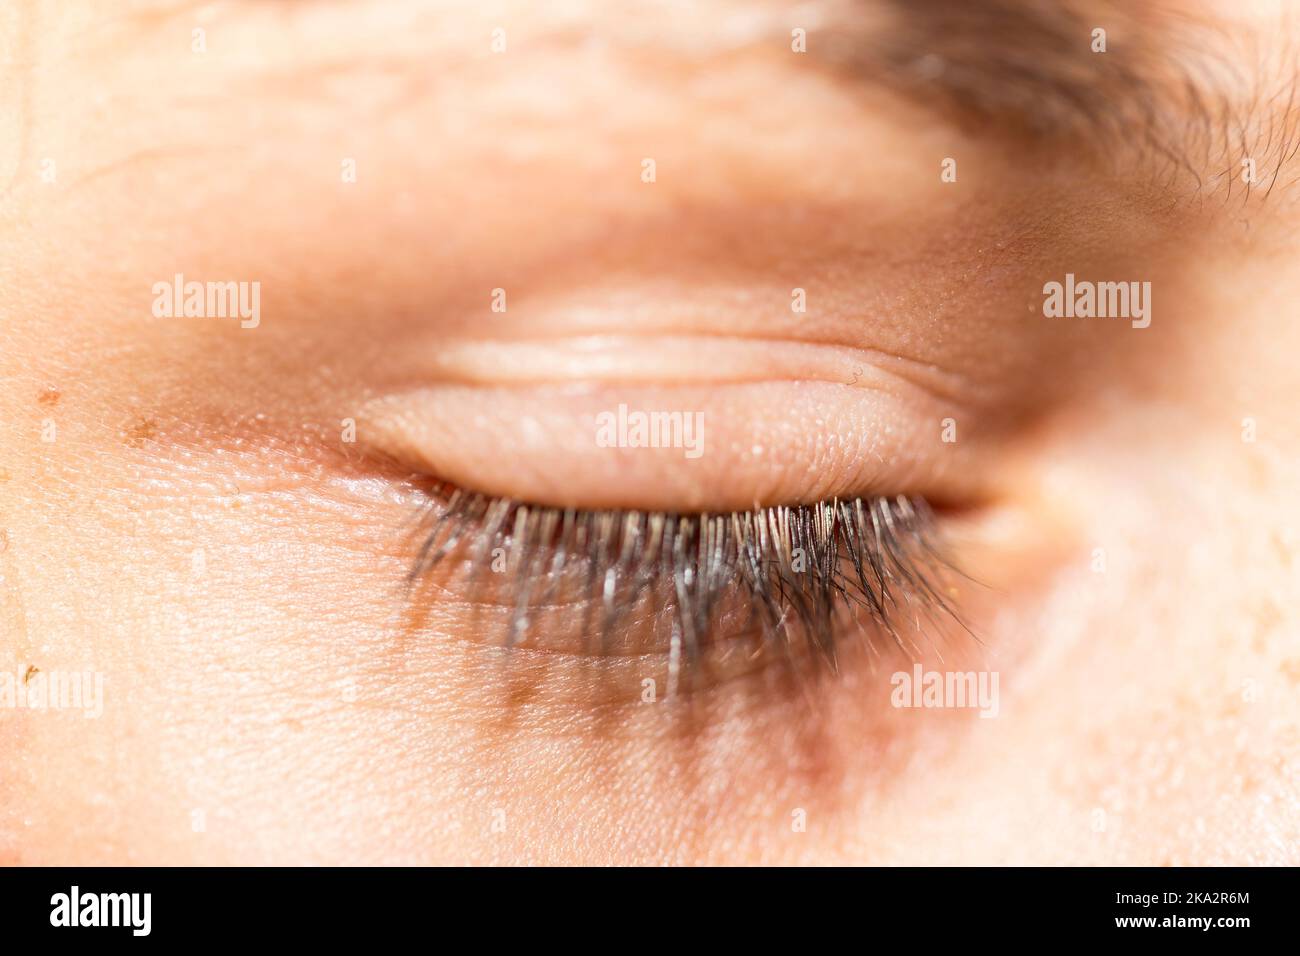 close up view of a boy closed eye Stock Photo